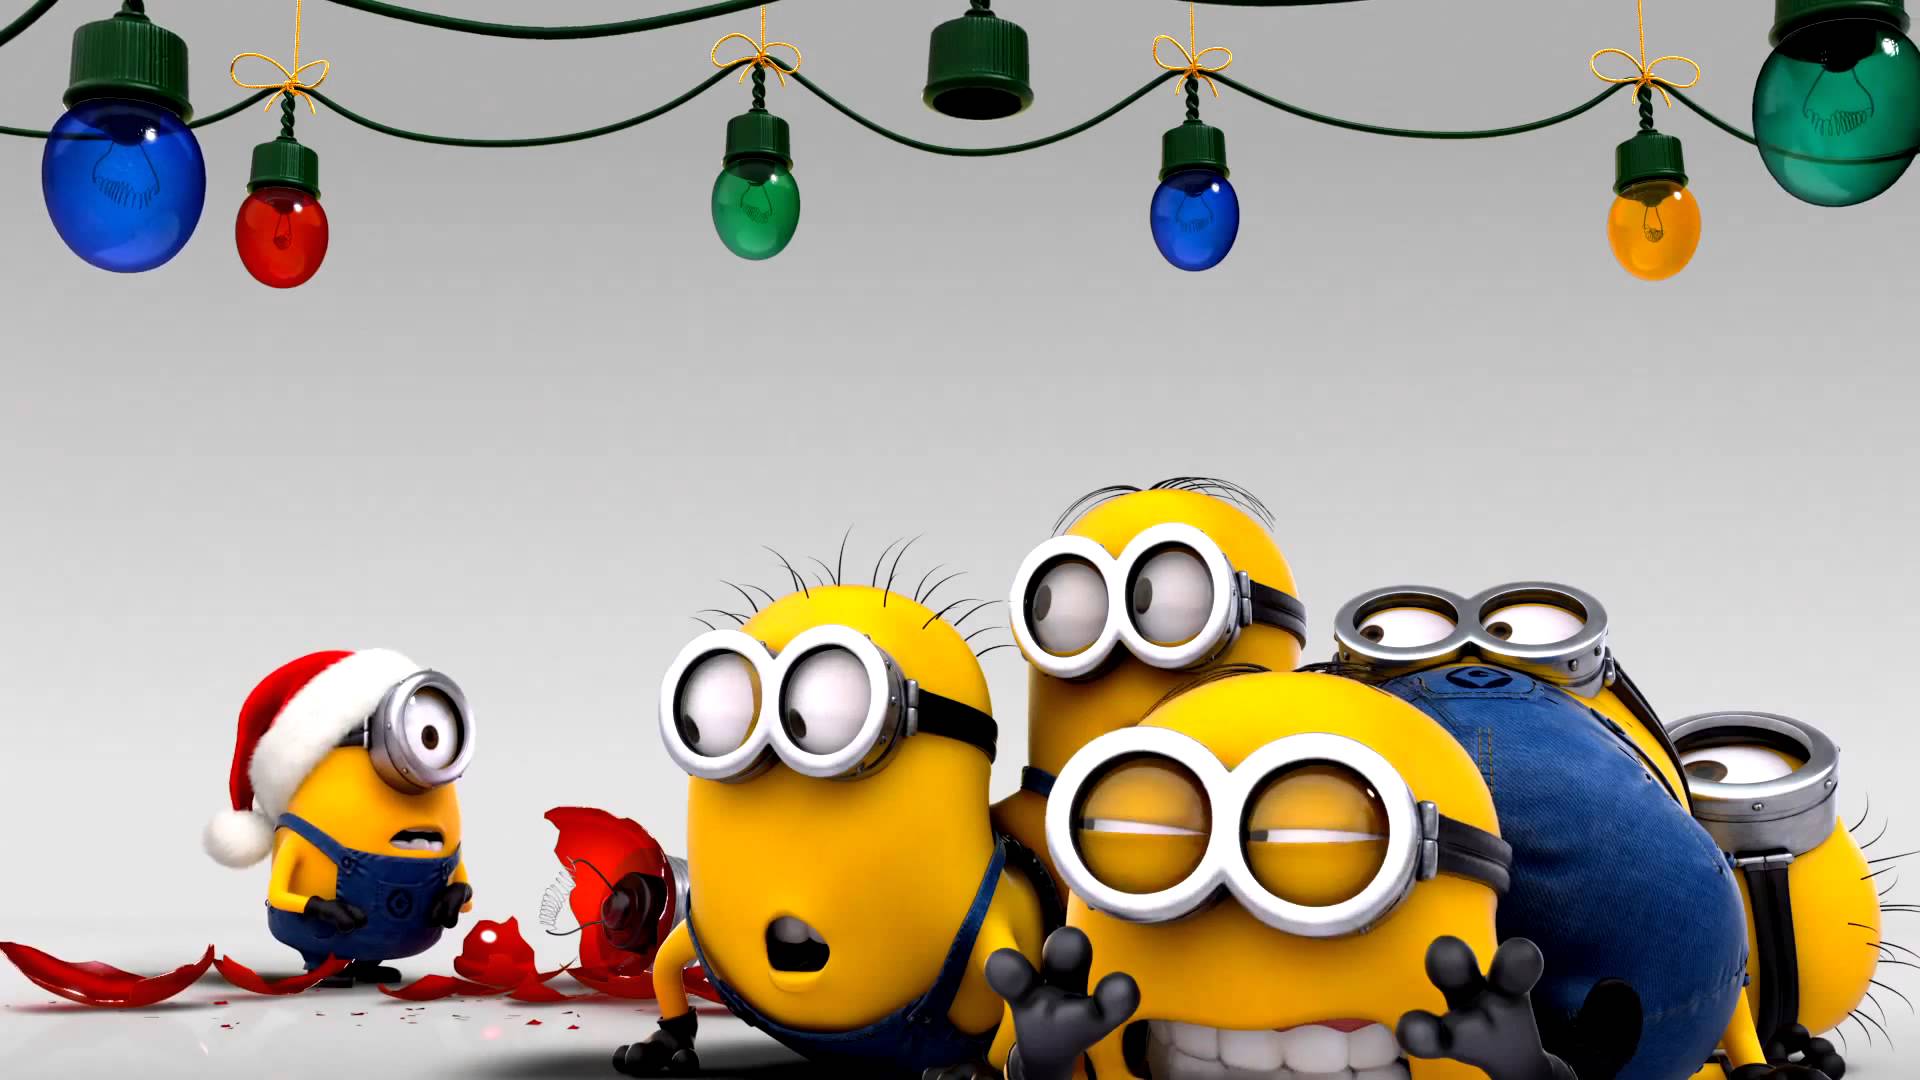 of despicable 4K wallpaper for your desktop or